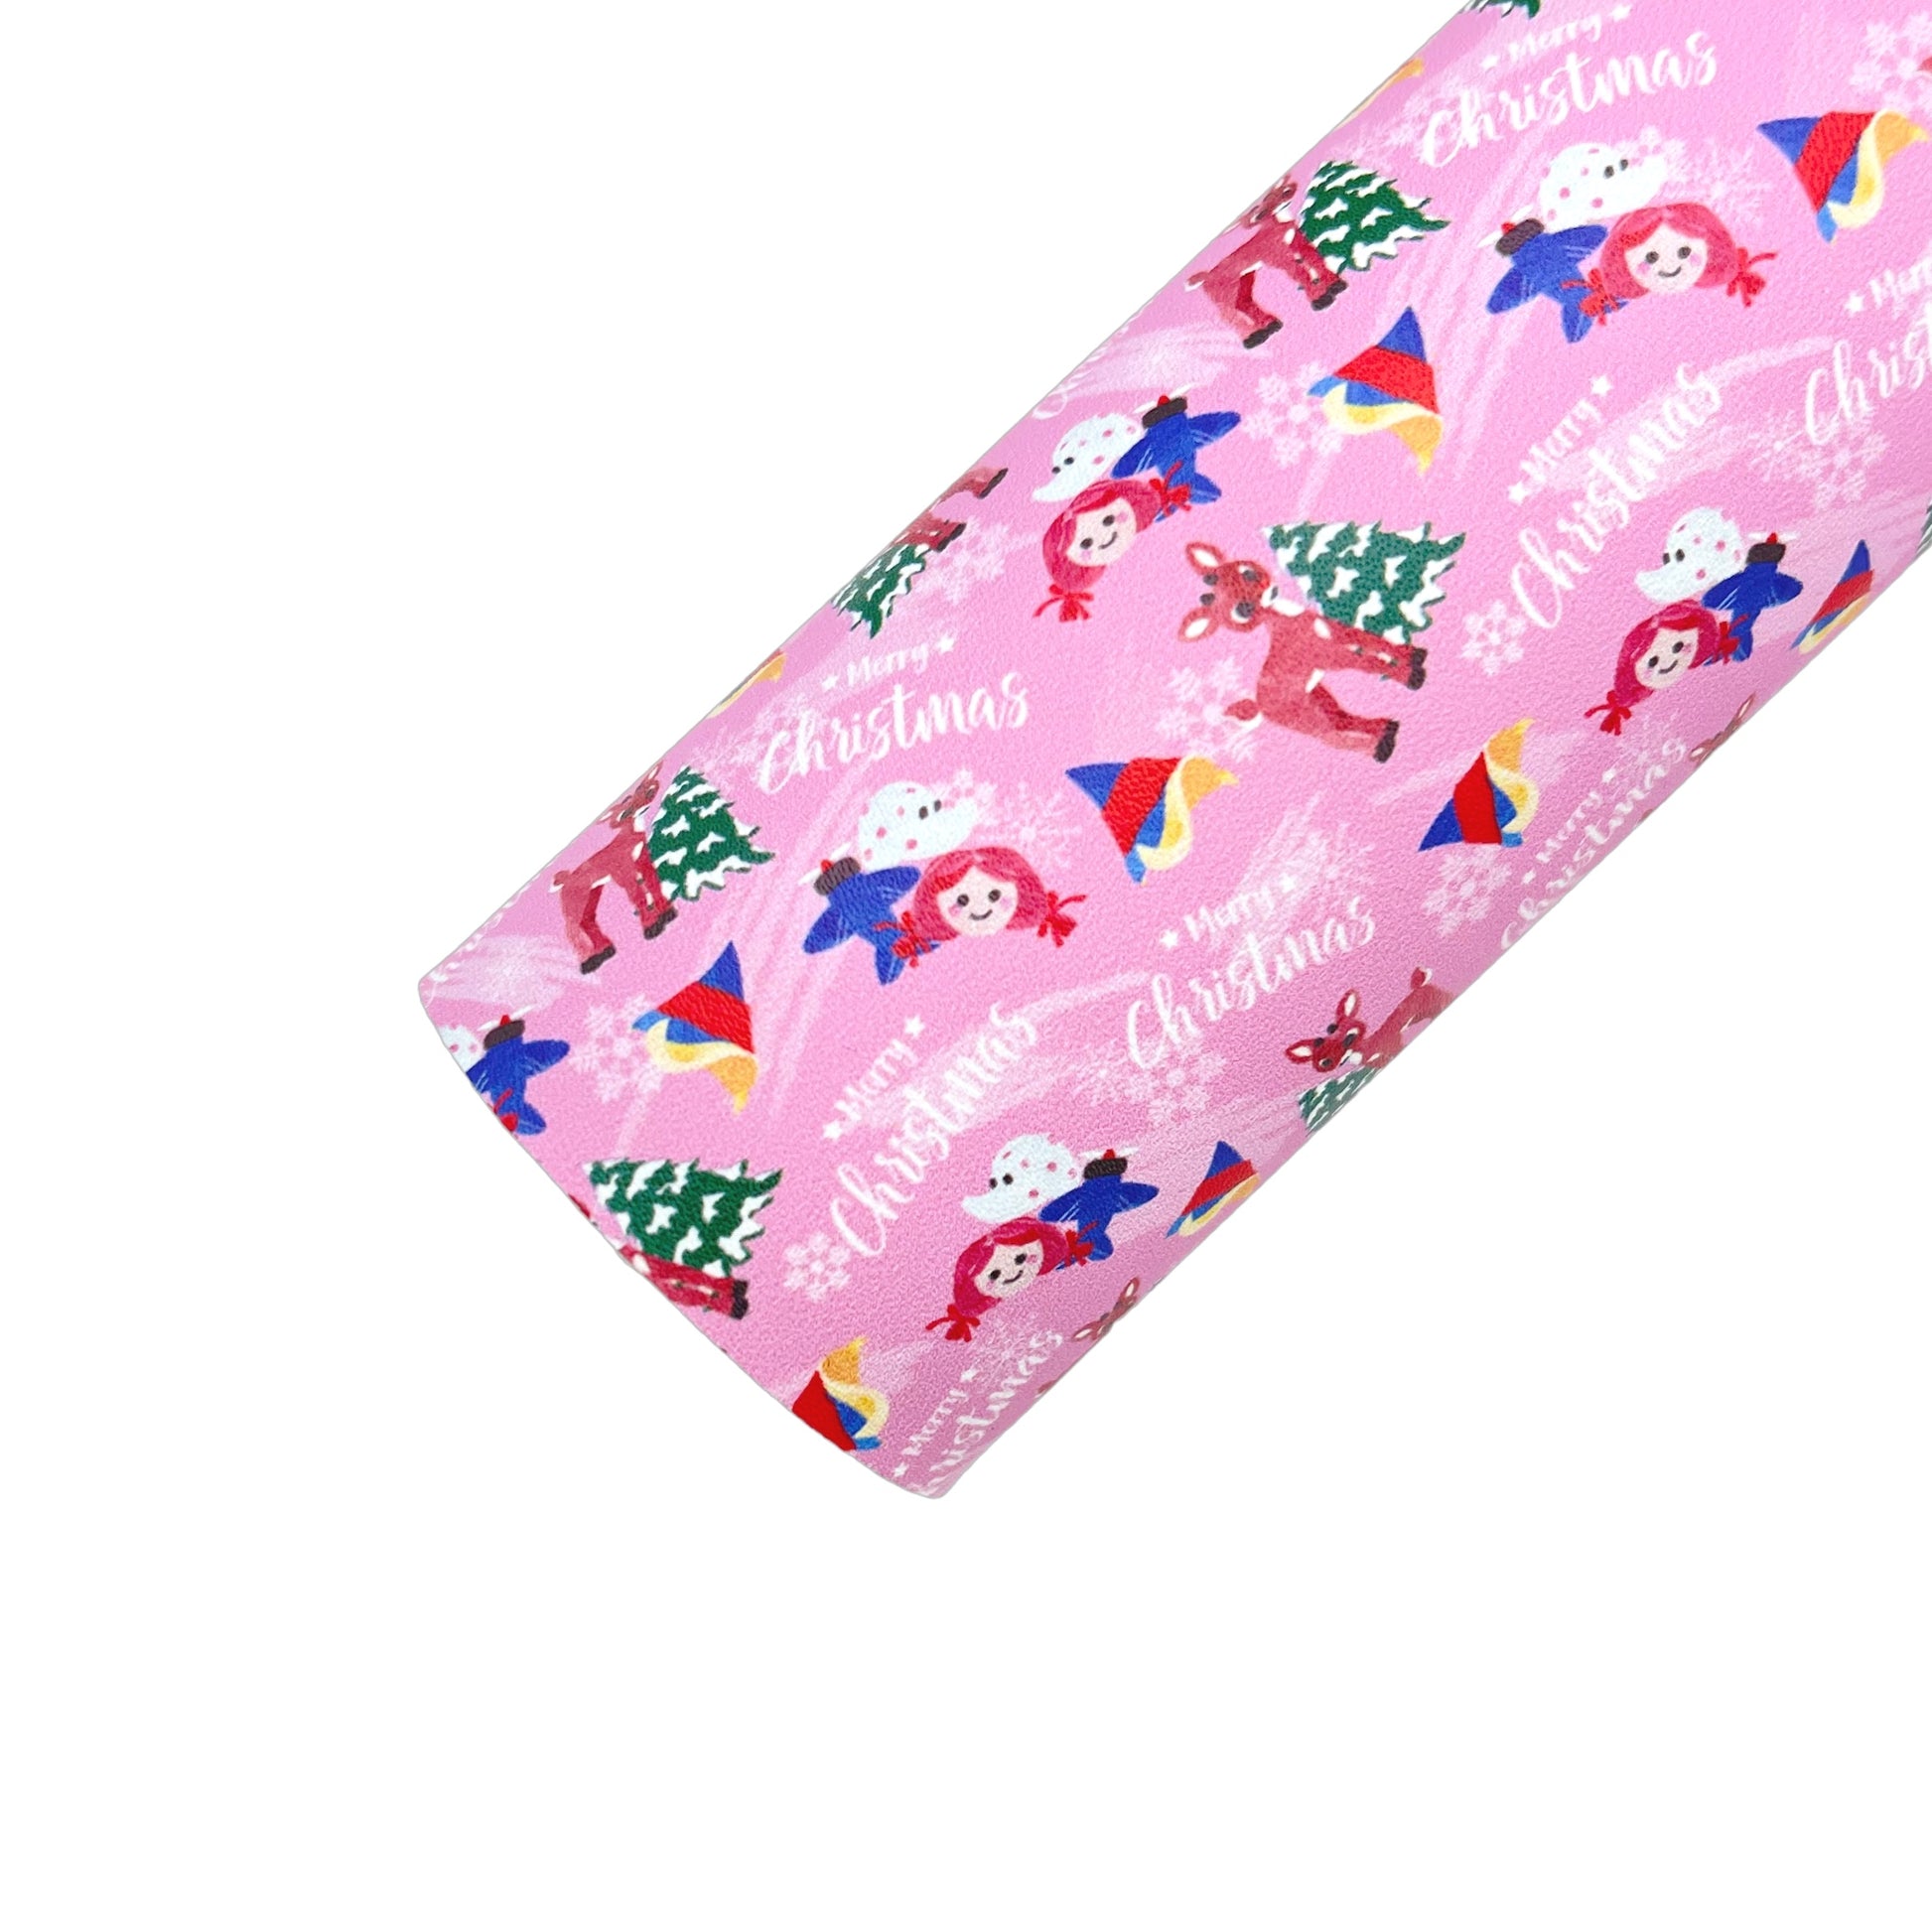 Rolled pink faux leather sheet with reindeer, doll, elephant, toy plane, and Christmas tree pattern.